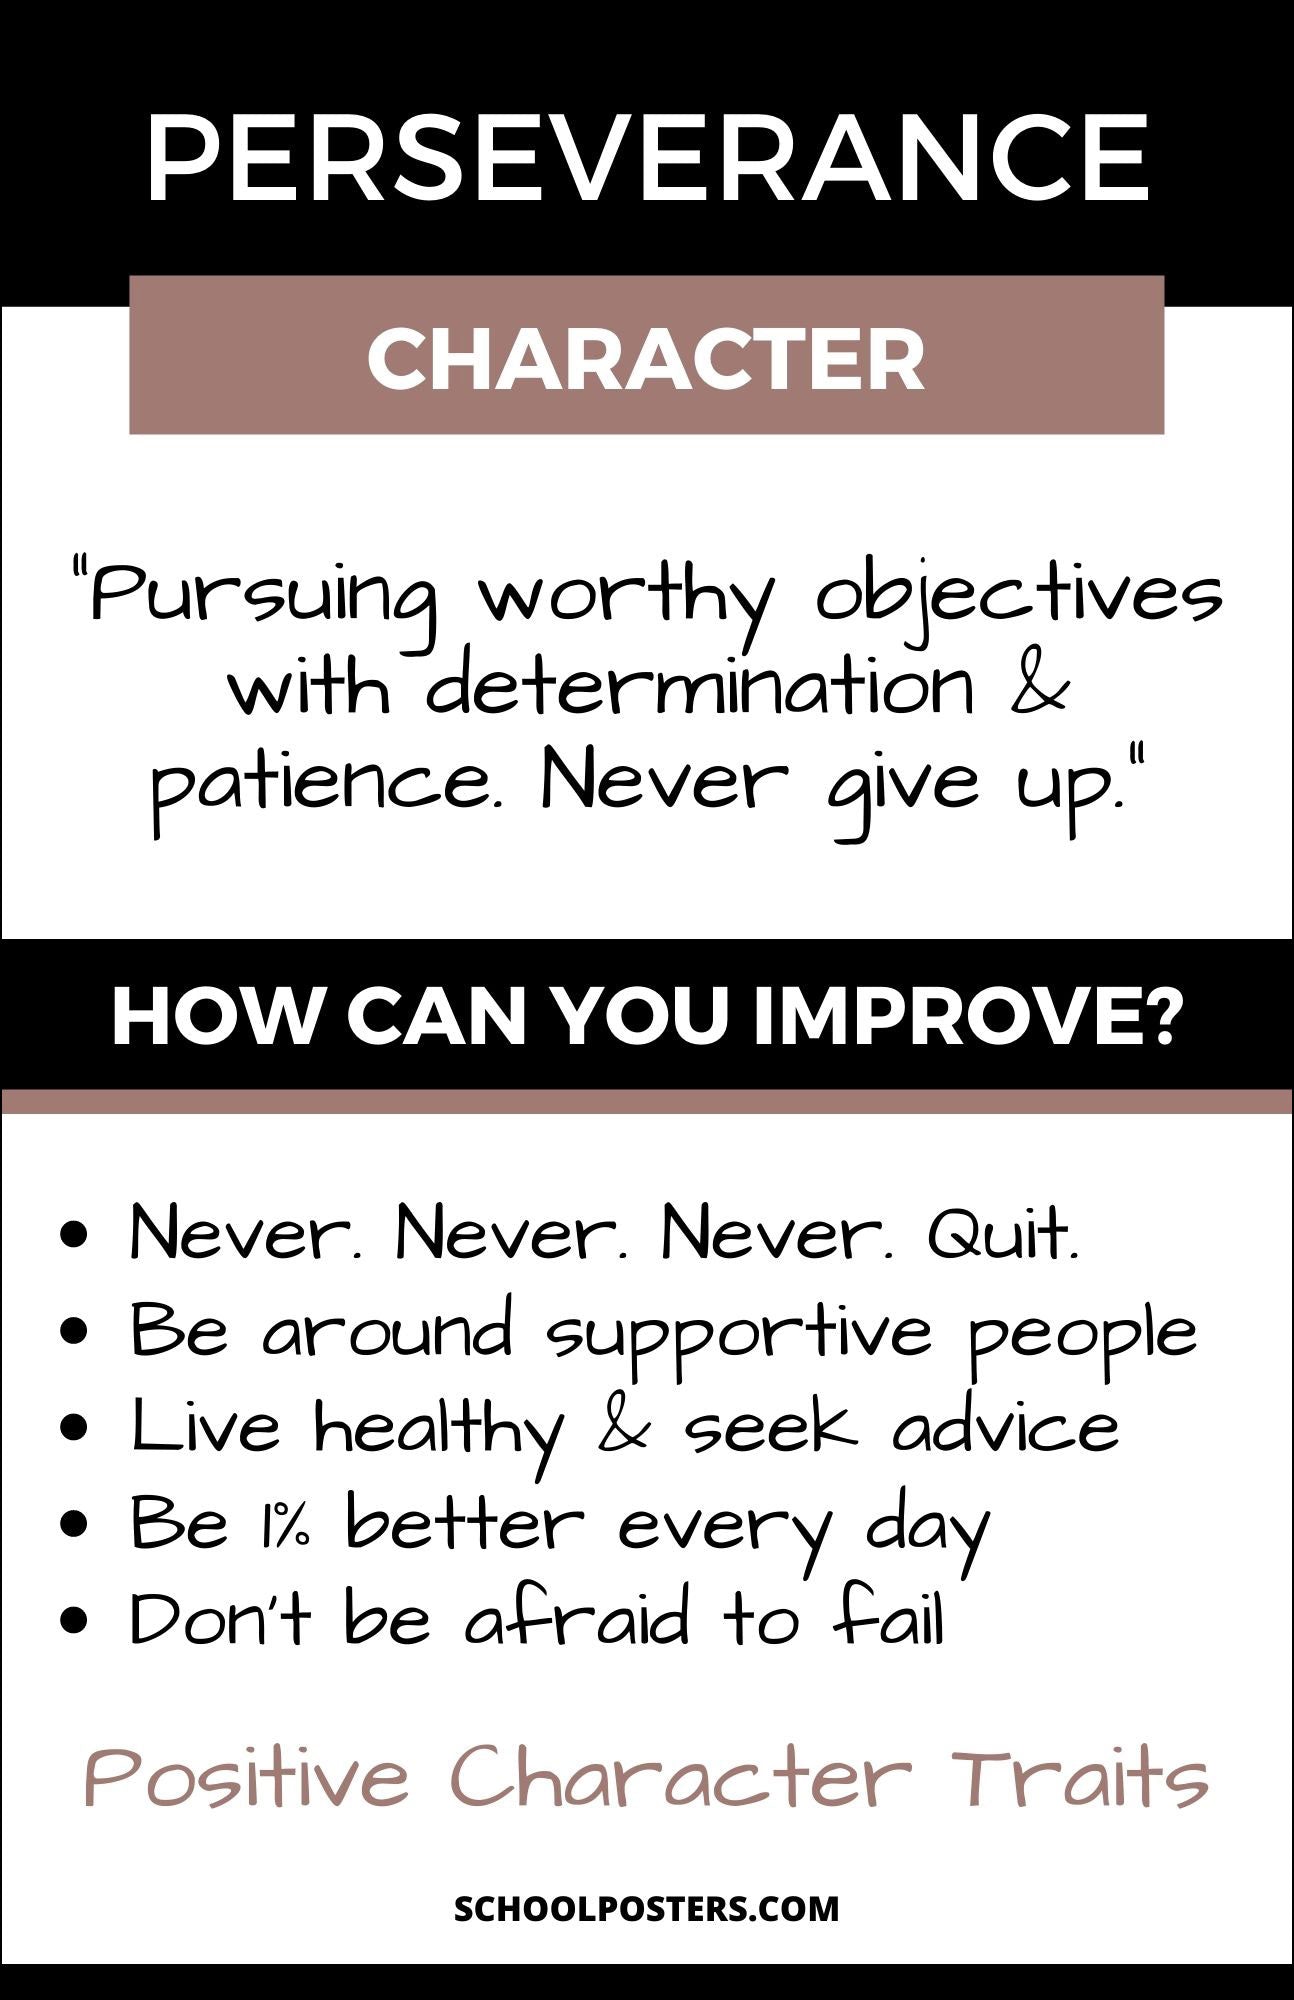 Perseverance Character Trait Poster